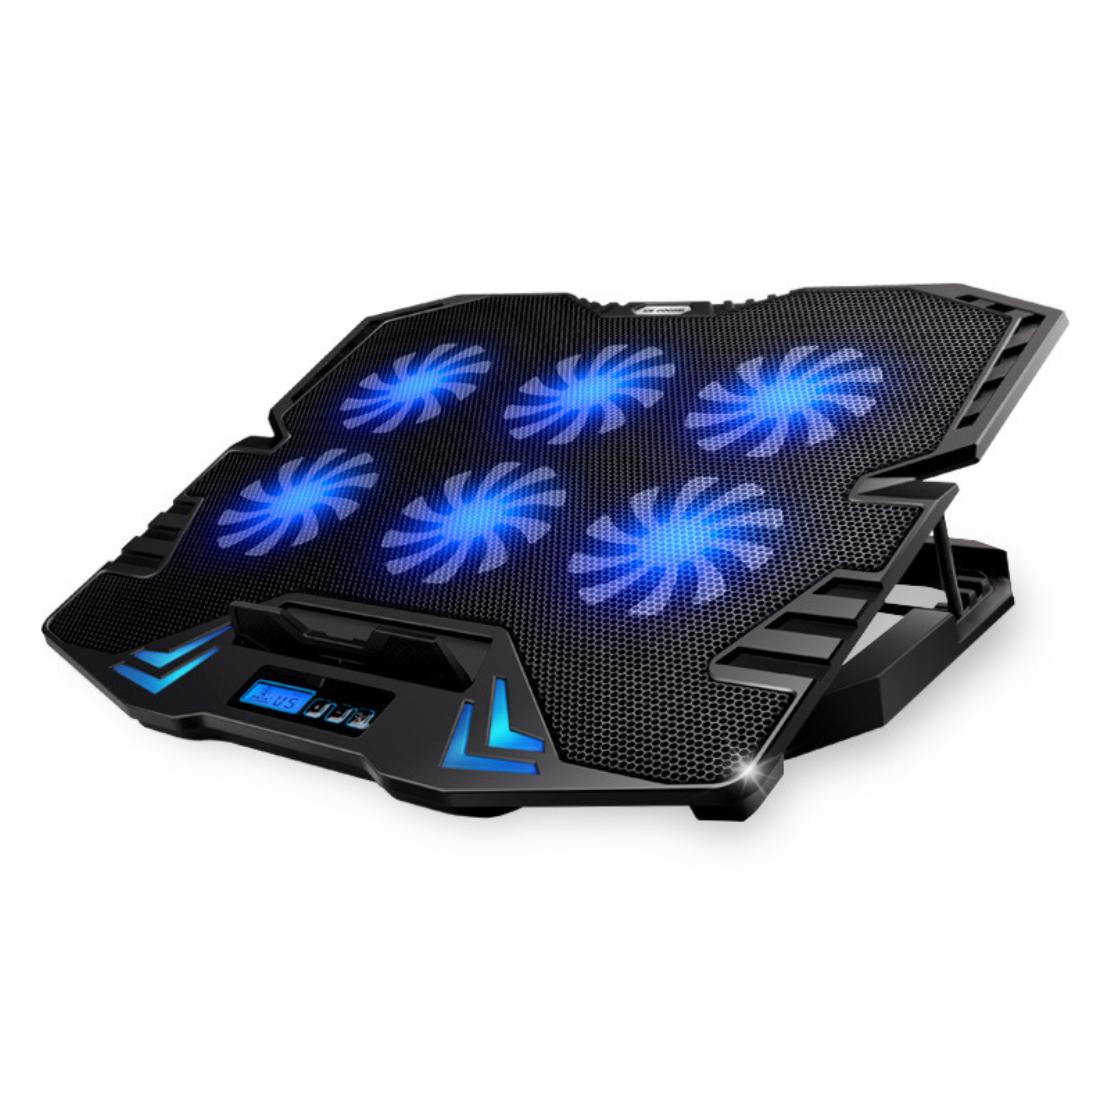 Lc 8 Laptop Cooler Cooling Pads Super Mute 6 Fans Ice Cooling With Rack Stand And Built In Lcd Display 5 Speed Of Fans For Laptop Notebook